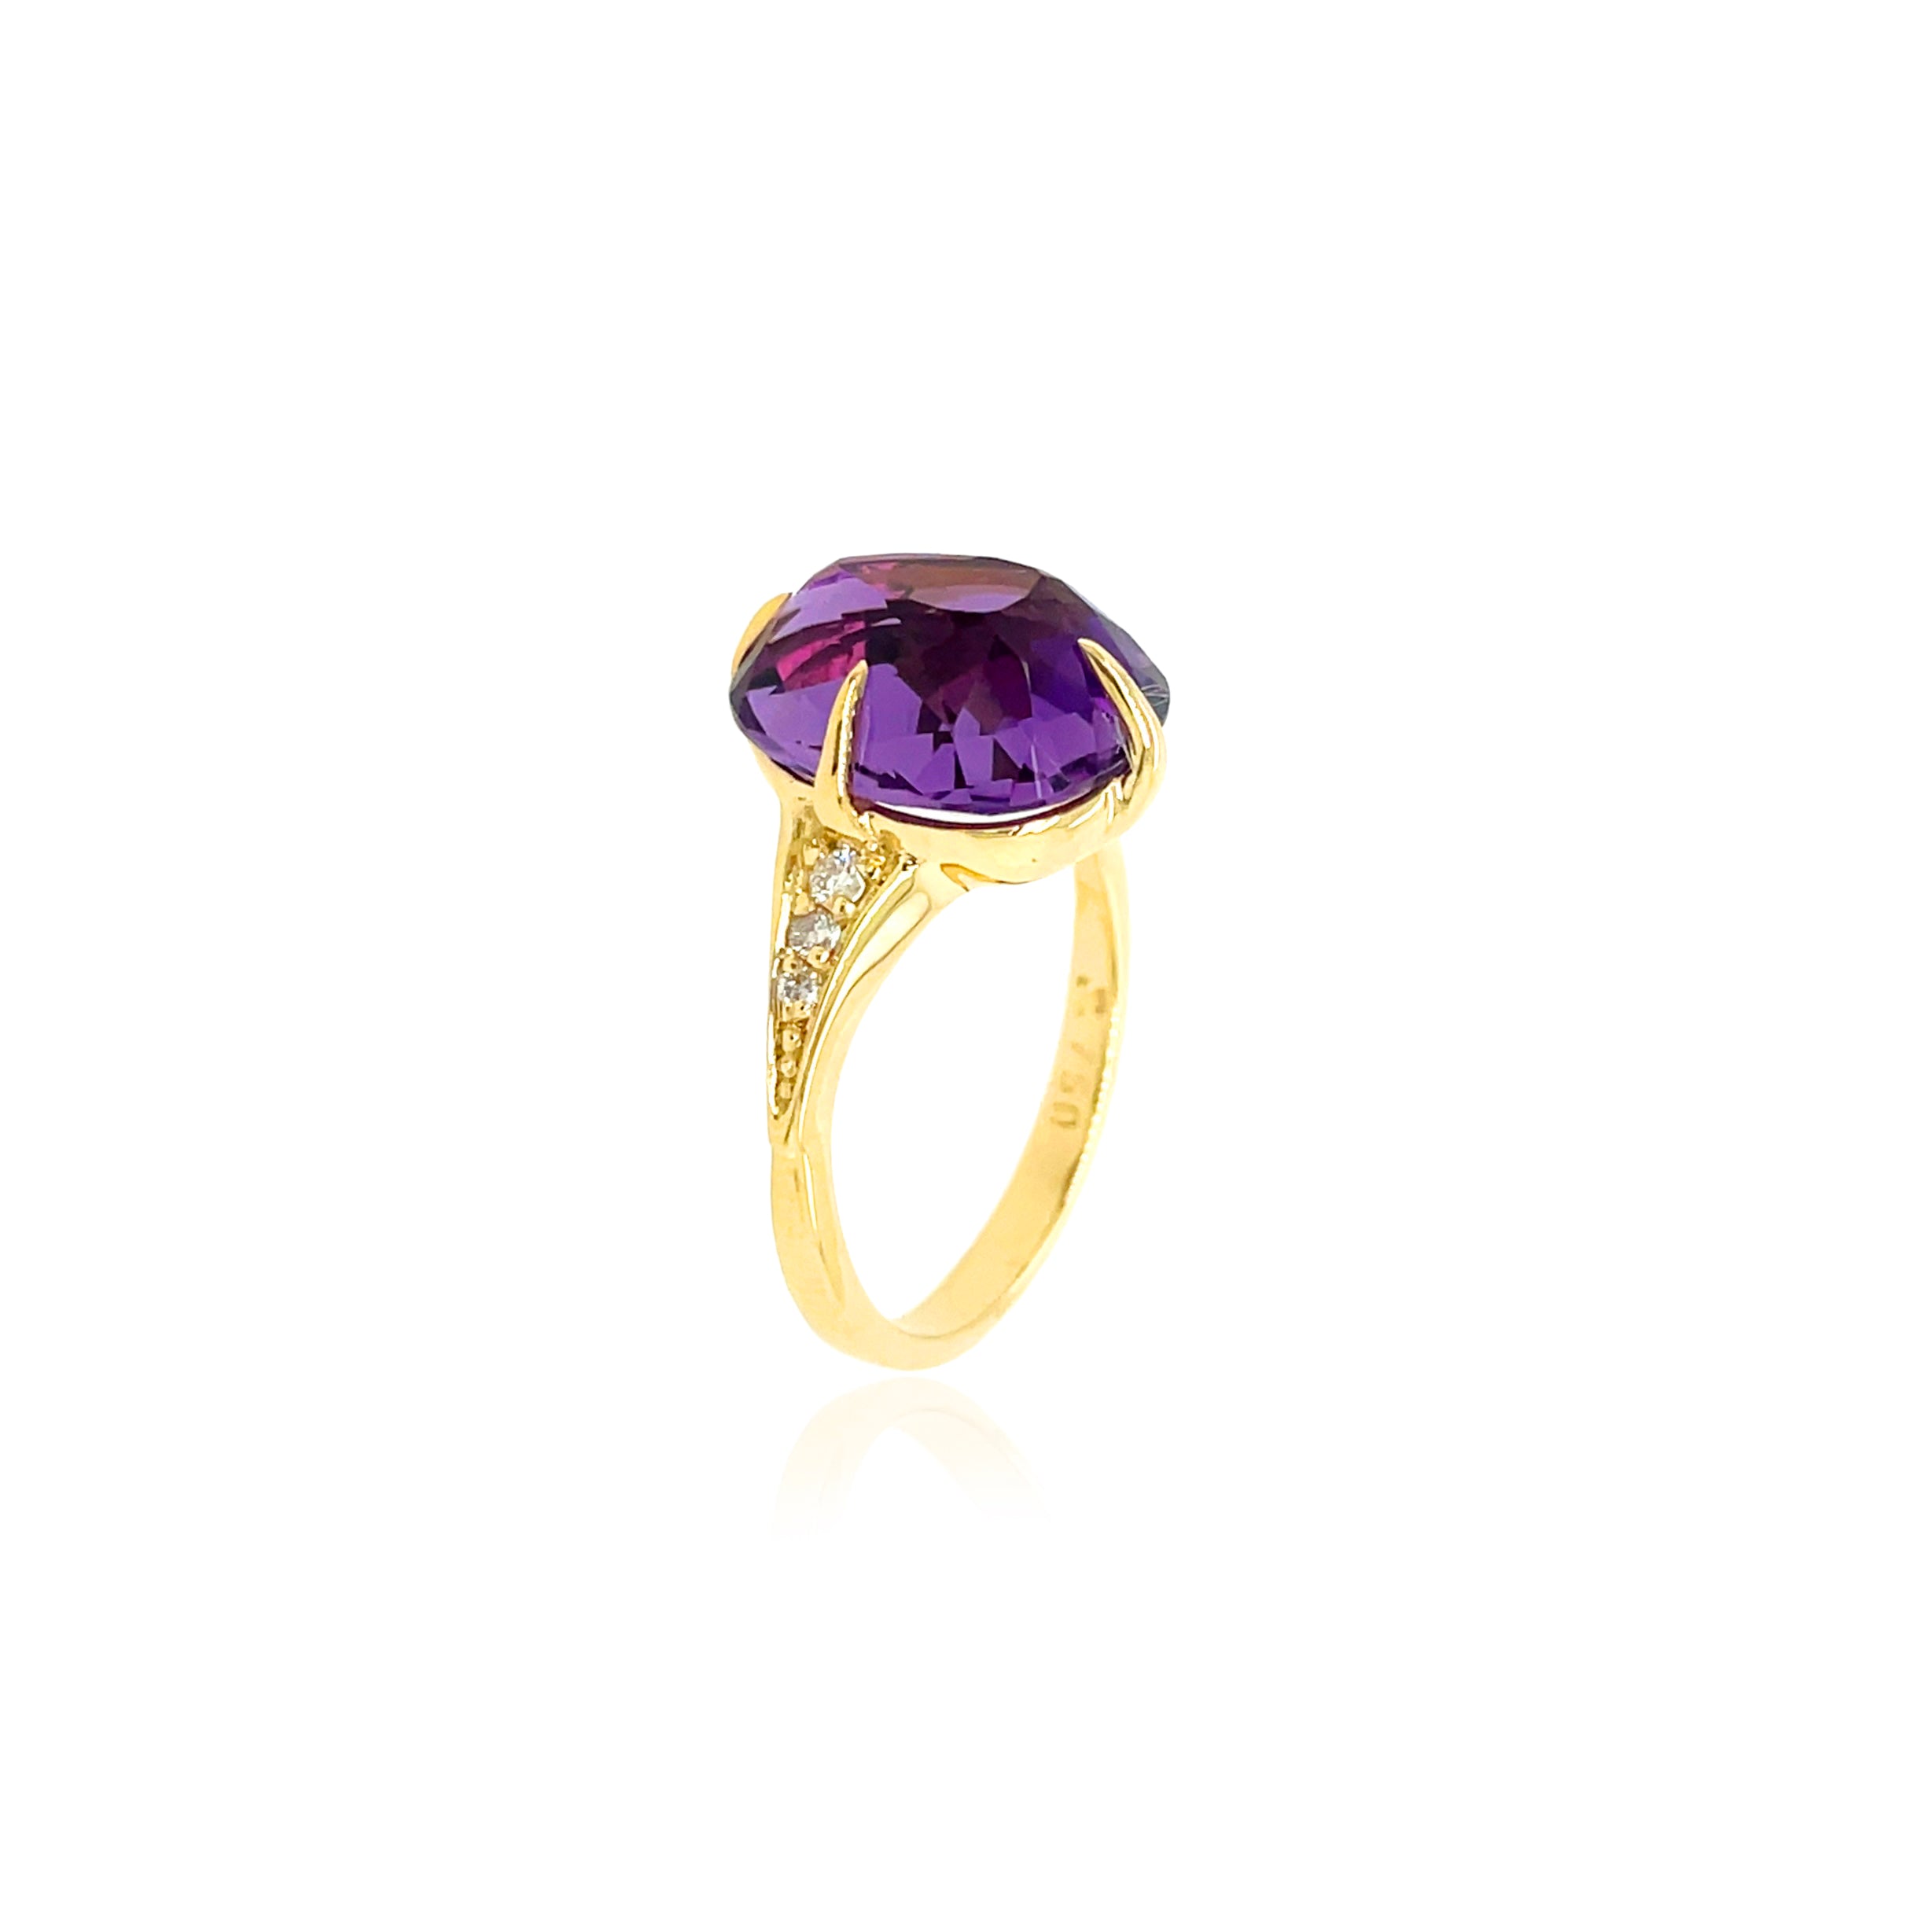 From the sumptuous SugarLoaf collection from Brazil, this tear-shaped faceted amethyst (16.40 cts) ring is complemented by sparkling small diamonds (.09 cts) and is set in 18k yellow gold. 15.00 mm